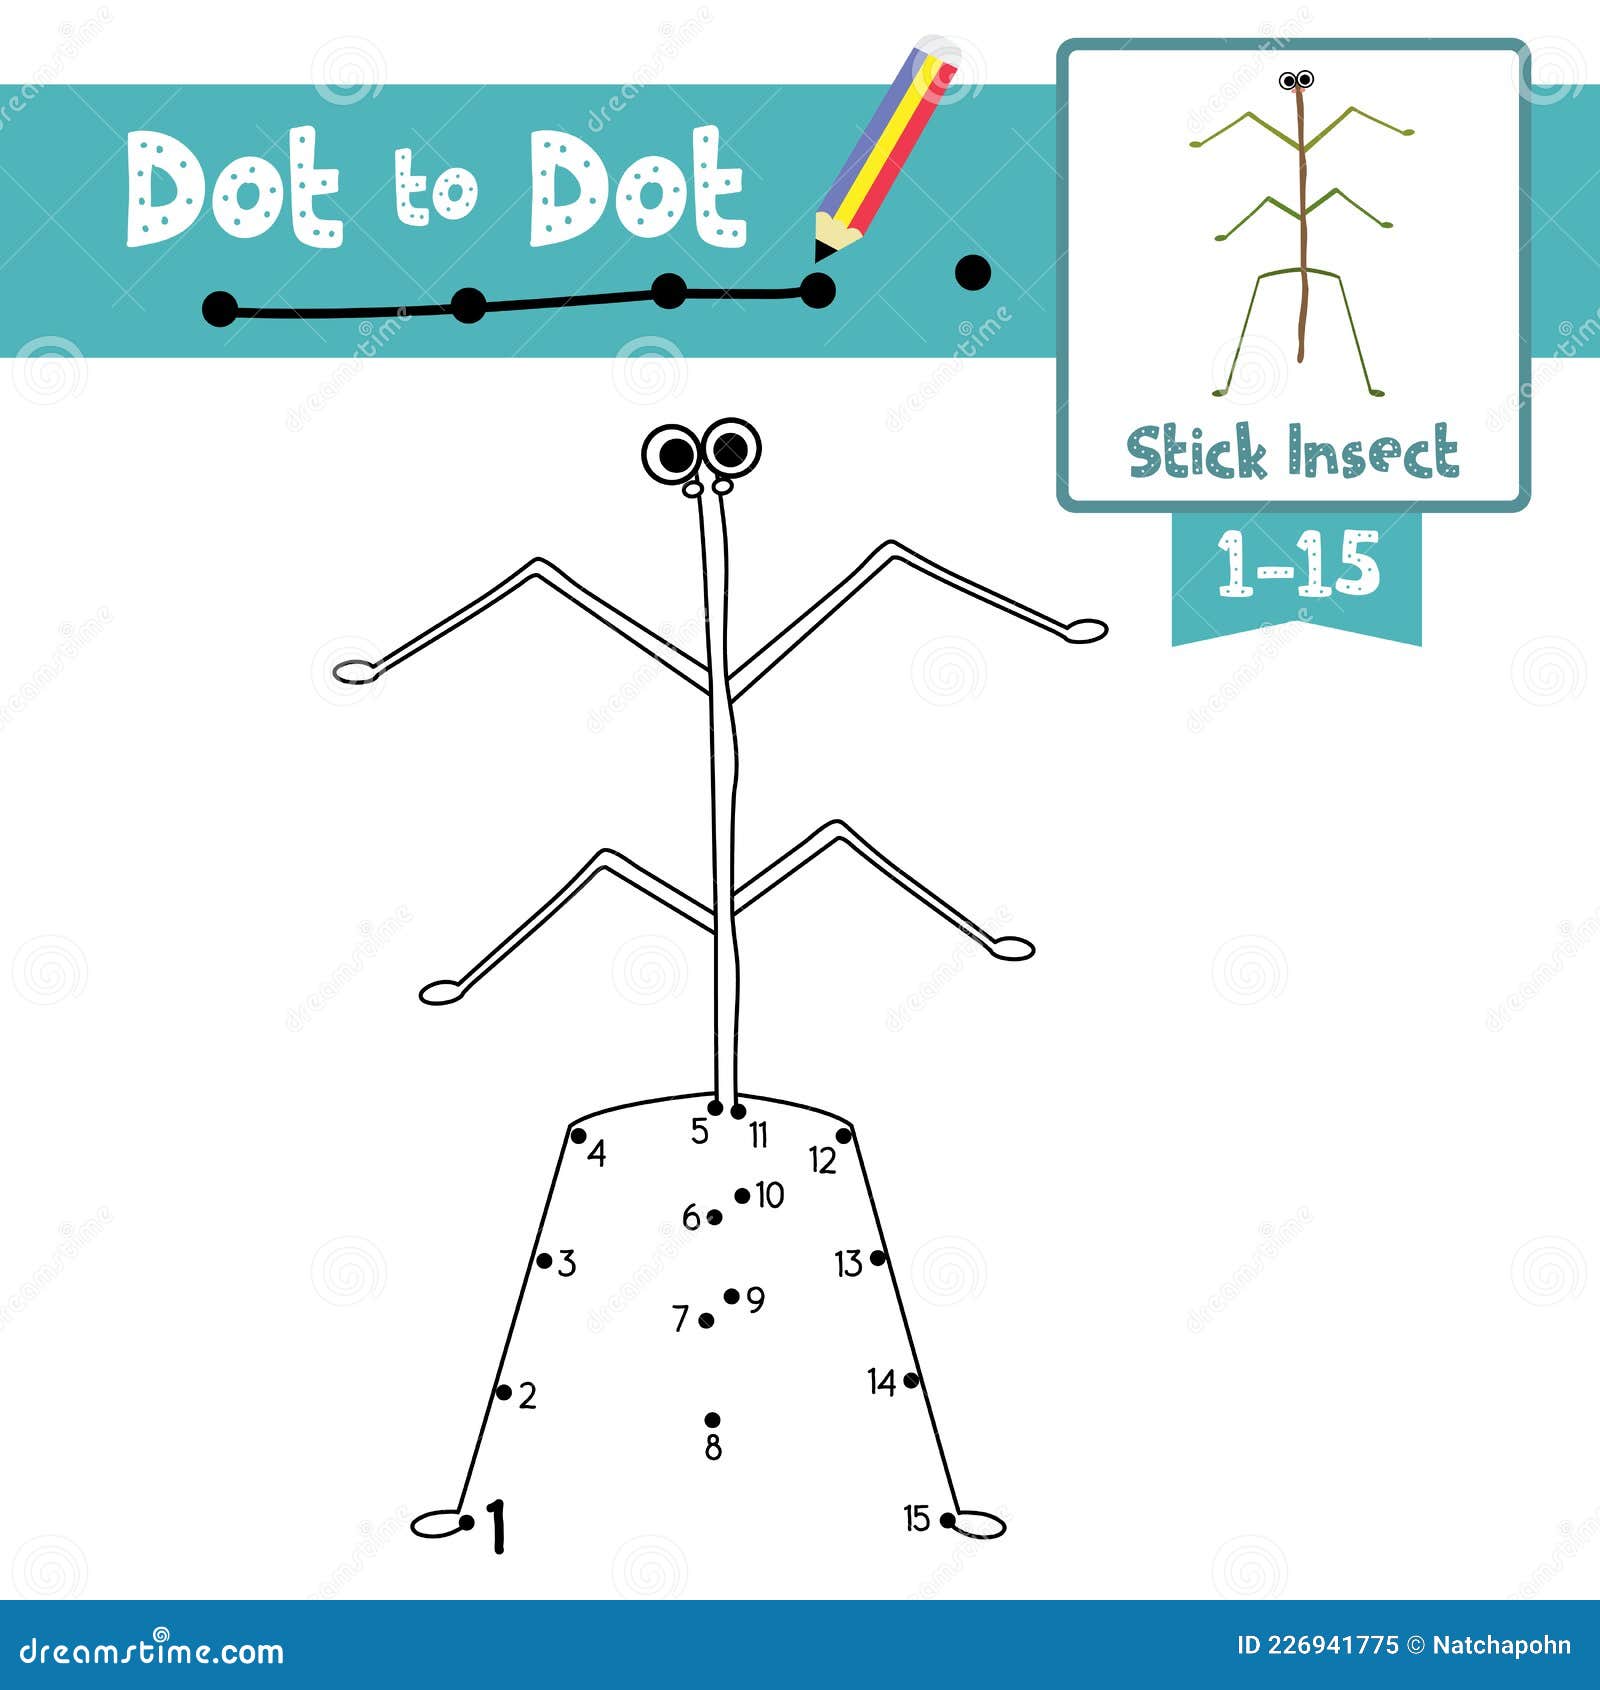 Dot to dot educational game and coloring book stick insect standing on two legs animal cartoon character vector illustration stock vector